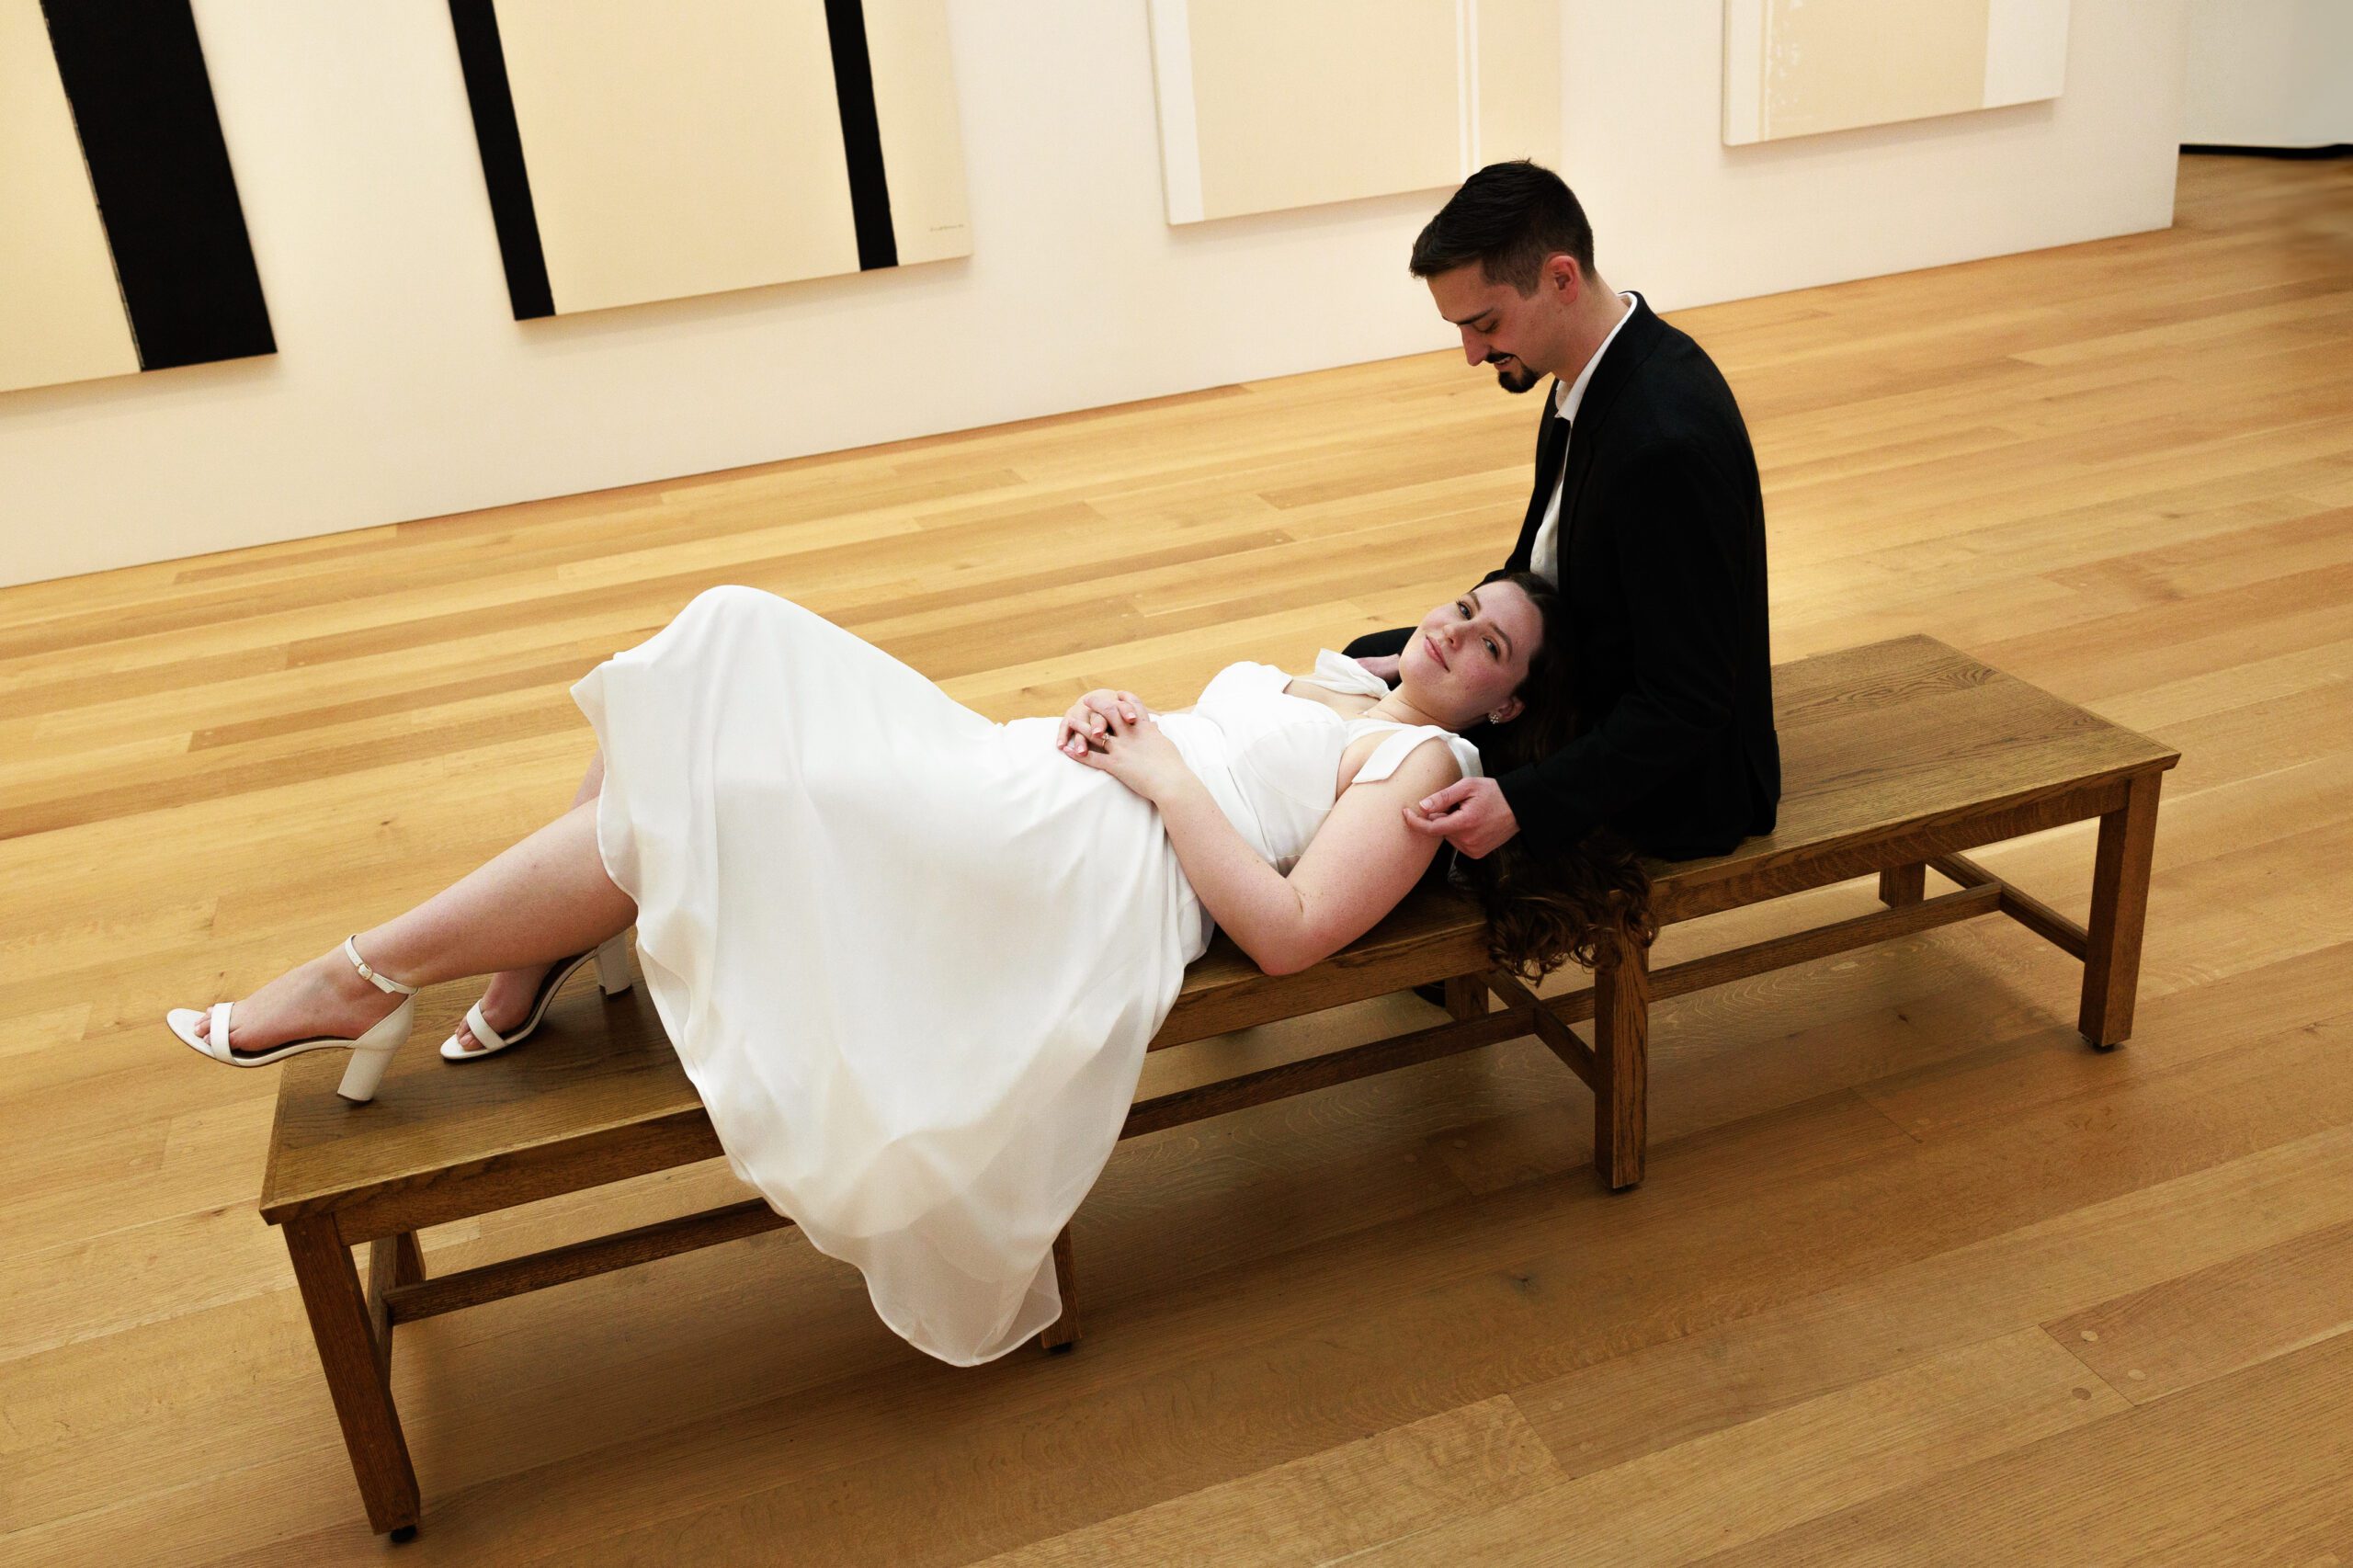 White dress engagement photo at the national gallery of art